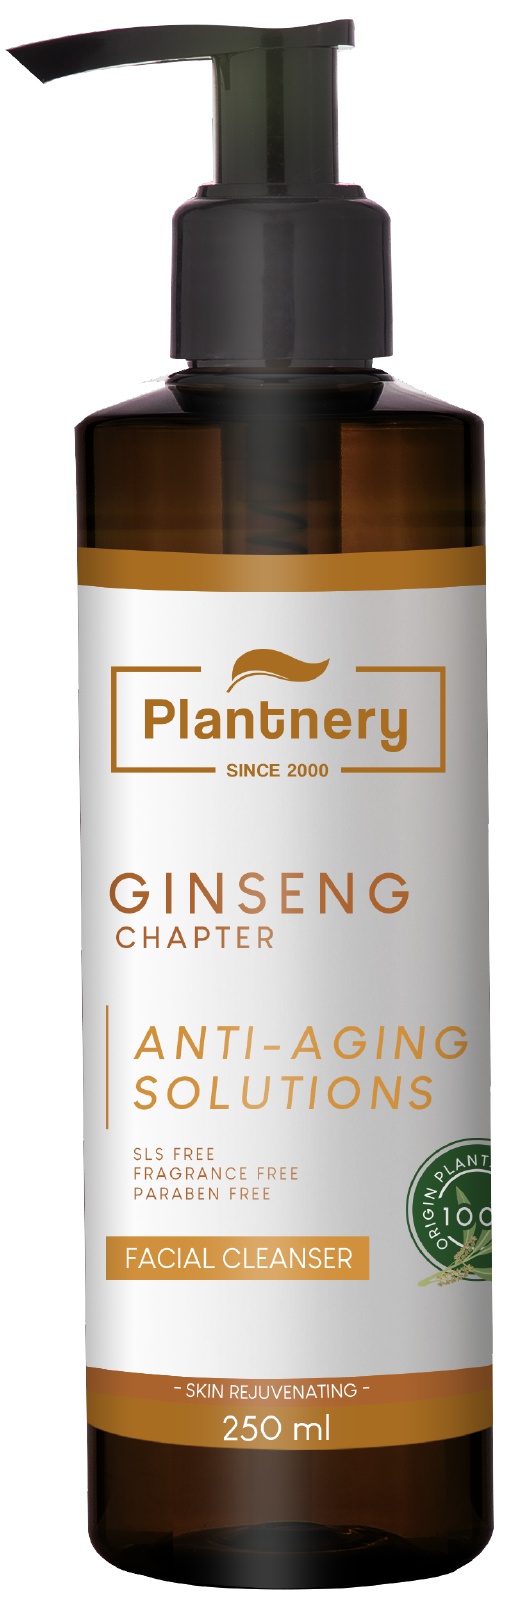 Plantnery Ginseng Facial Cleanser